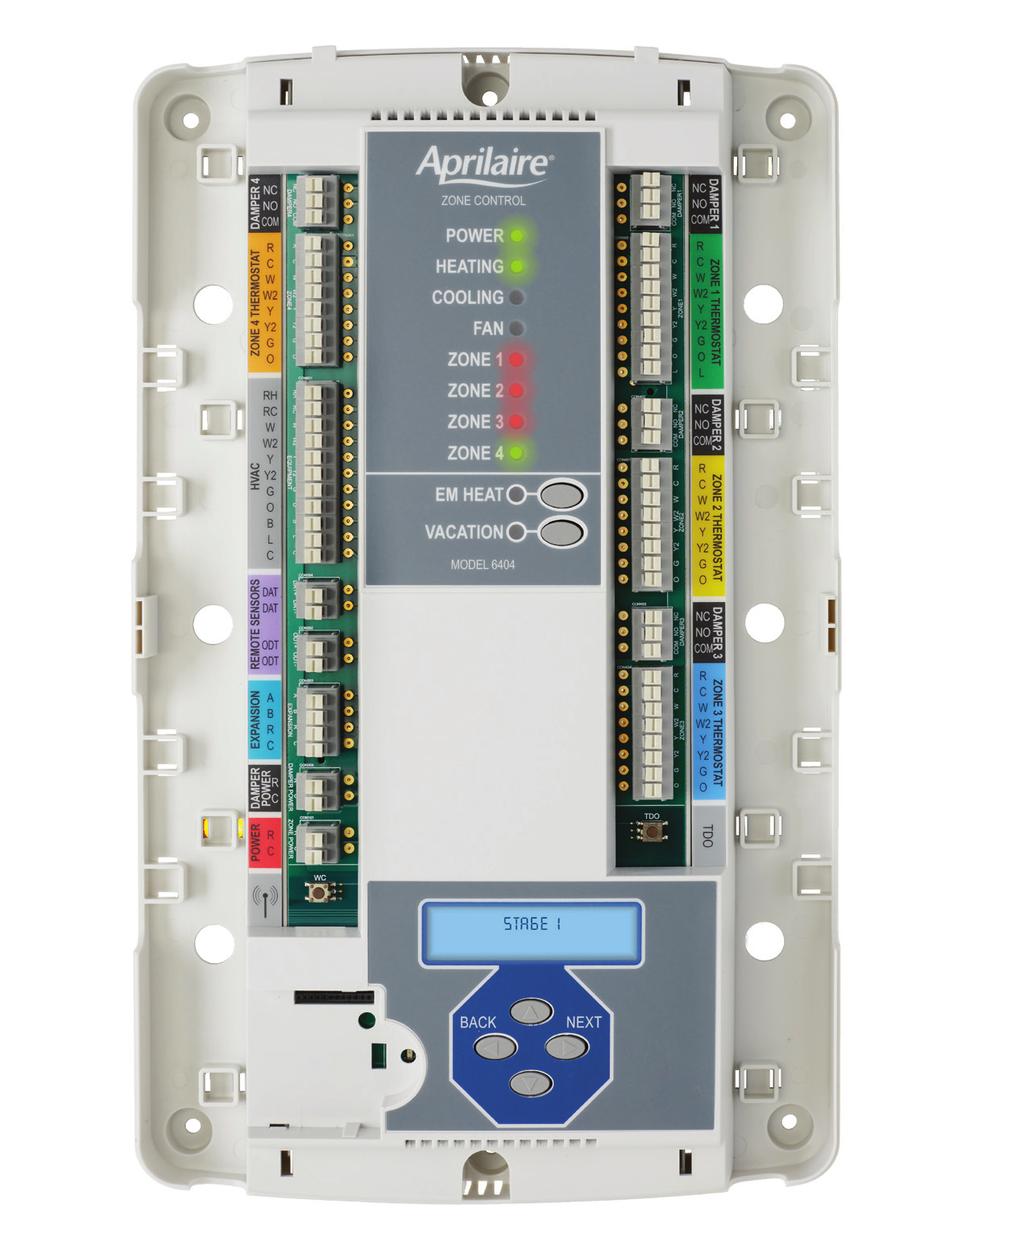 Zone Panels Intuitive Design + + Visual indicators and clear terminal designations allow installers to easily understand how to wire and set up the system with minimal training Wiring Simplicity + +